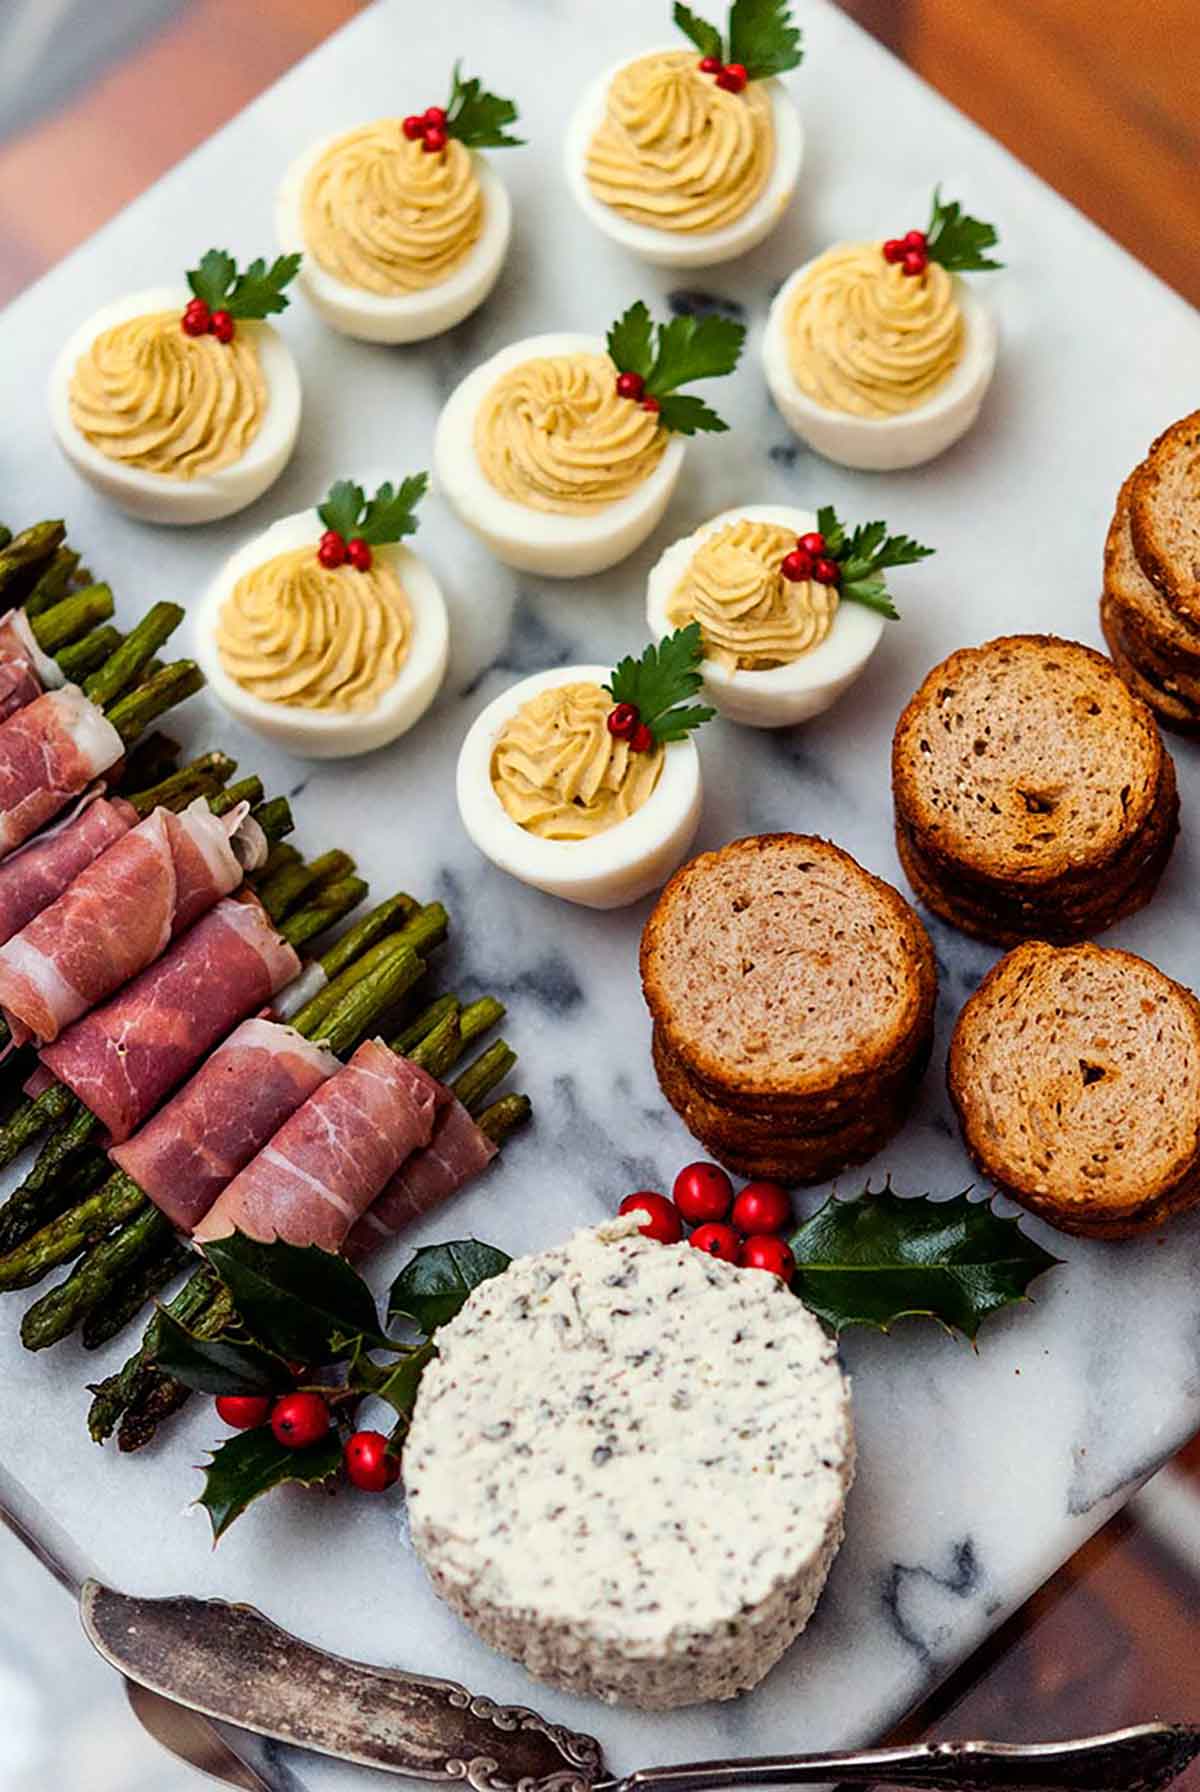 A cheese plate with cheese, prosciutto-wrapped asparagus, crackers and deviled eggs, garnished with peppercorns and parsley.